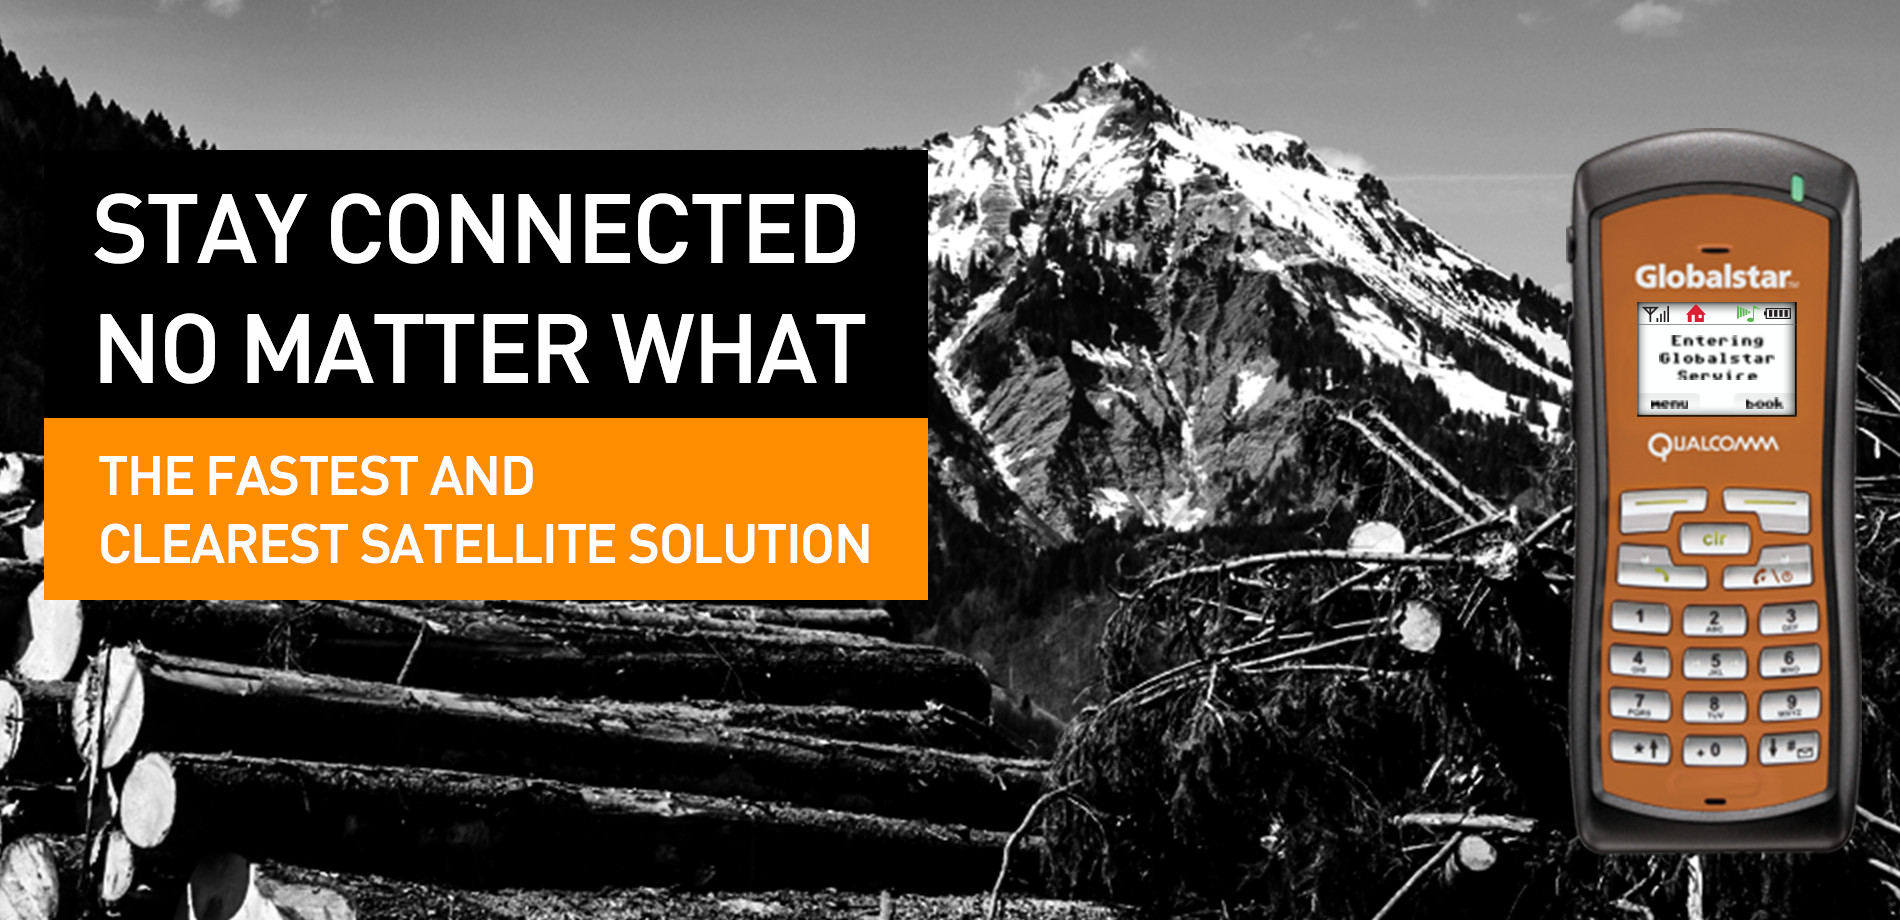 STAY CONNECTED NO MATTER WHAT - THE FASTEST AND CLEAREST SATELLITE SOLUTION